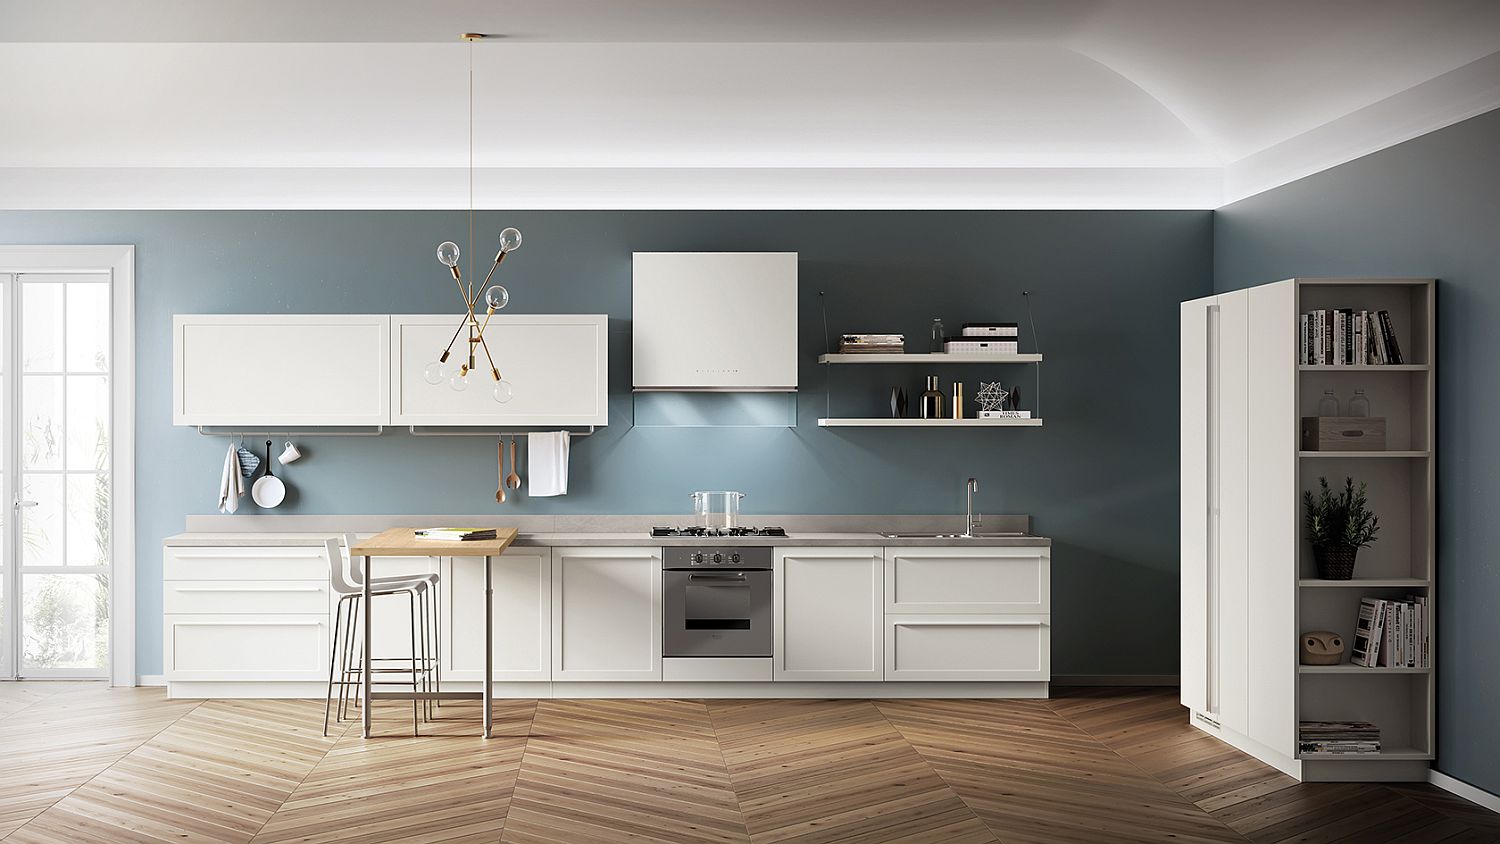 Carattere: Classical-Contemporary Kitchen Blends Sophistication with Ease